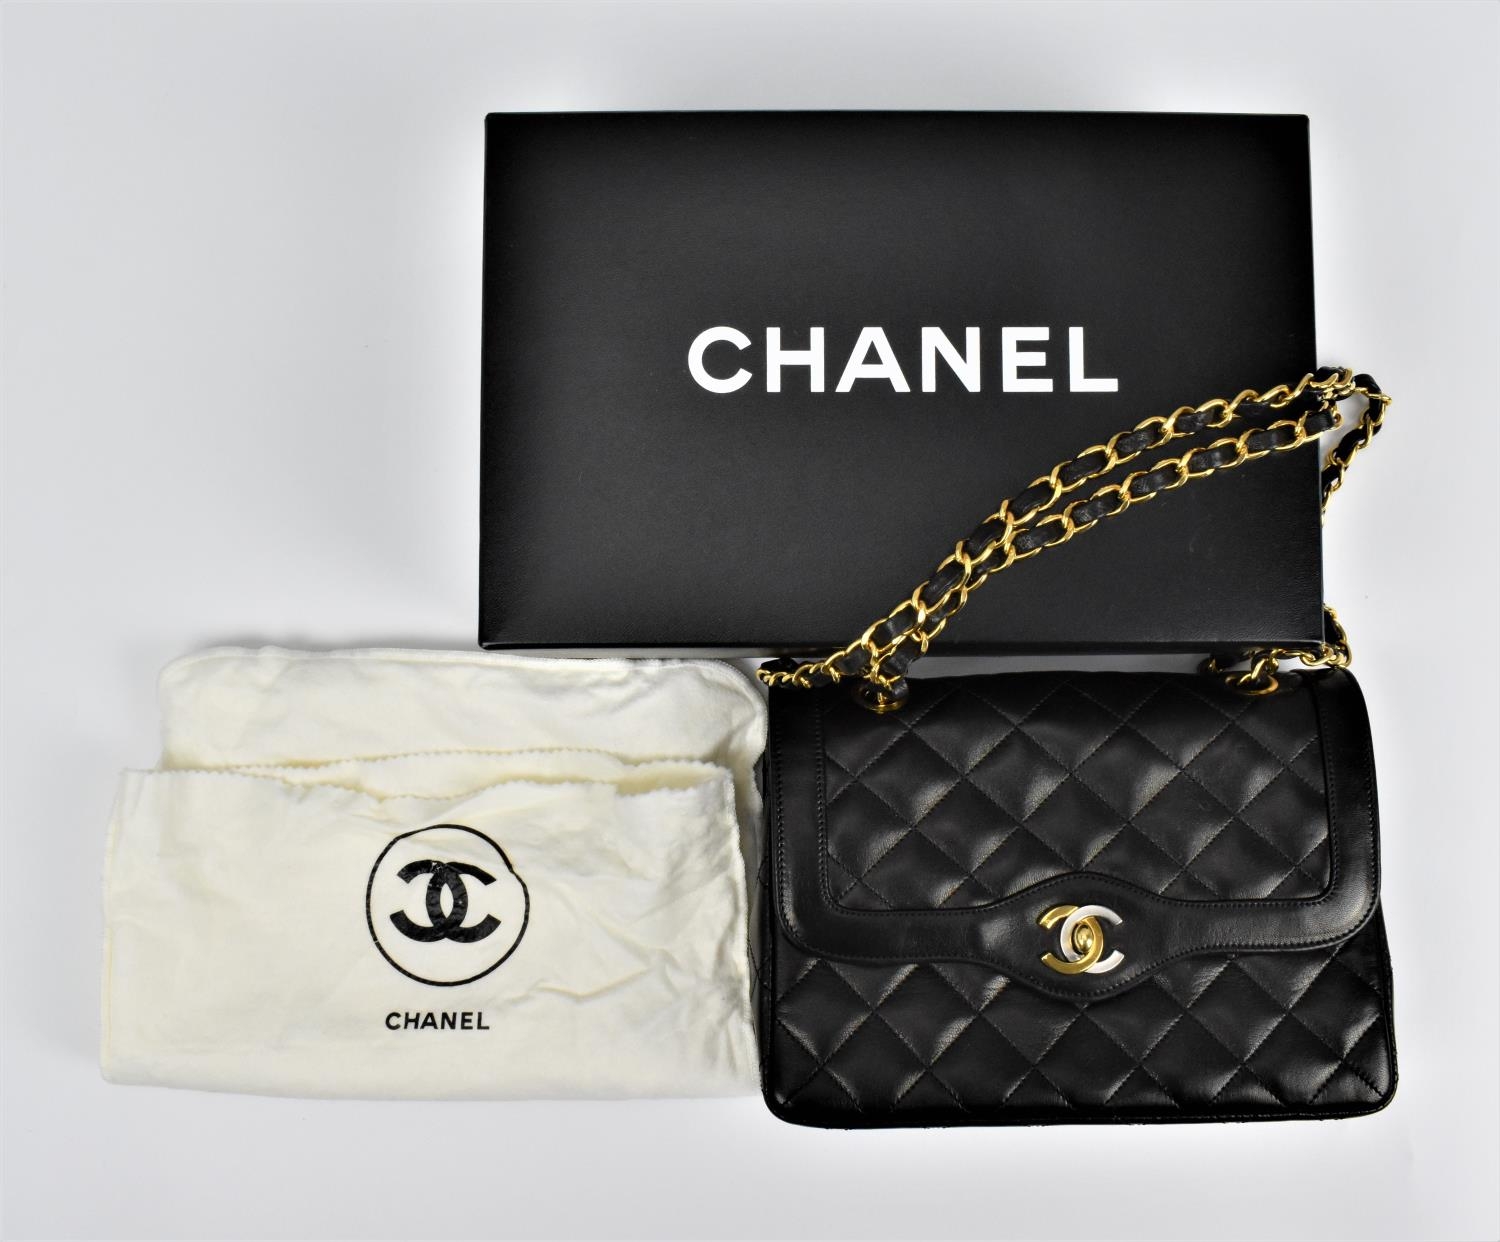 A Chanel, pre 1984, black lambskin double flap handbag with gold